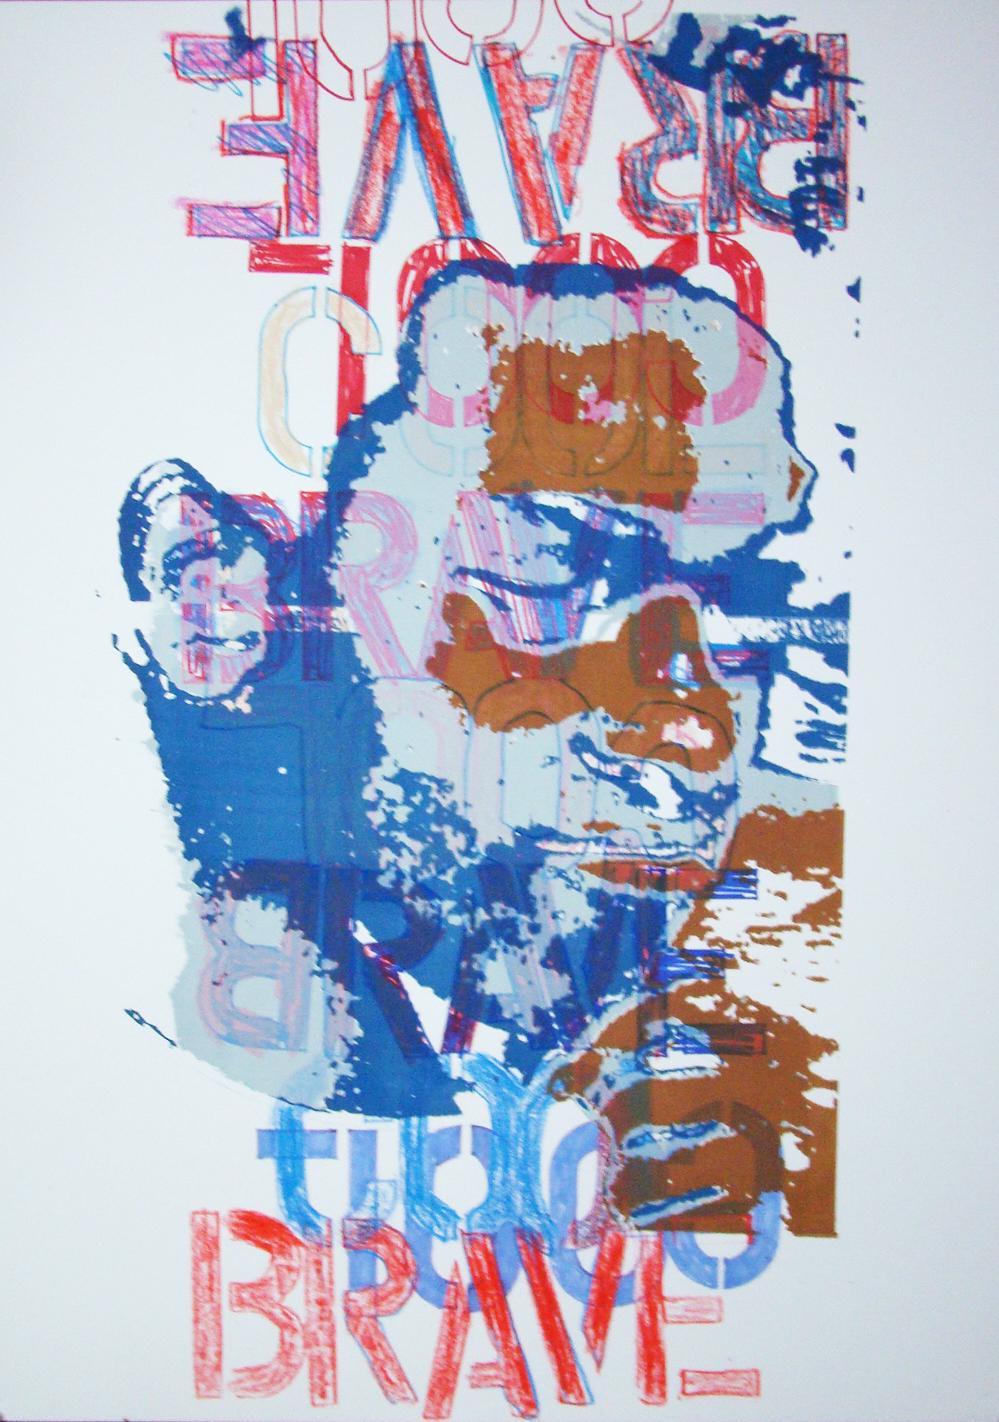 Tavon Green and Anne Brennan, Brave is Cool, 2010, 30 x 22, wax crayon, felt tip marker and screenprint on paper. Green wrote Brave is Cool.